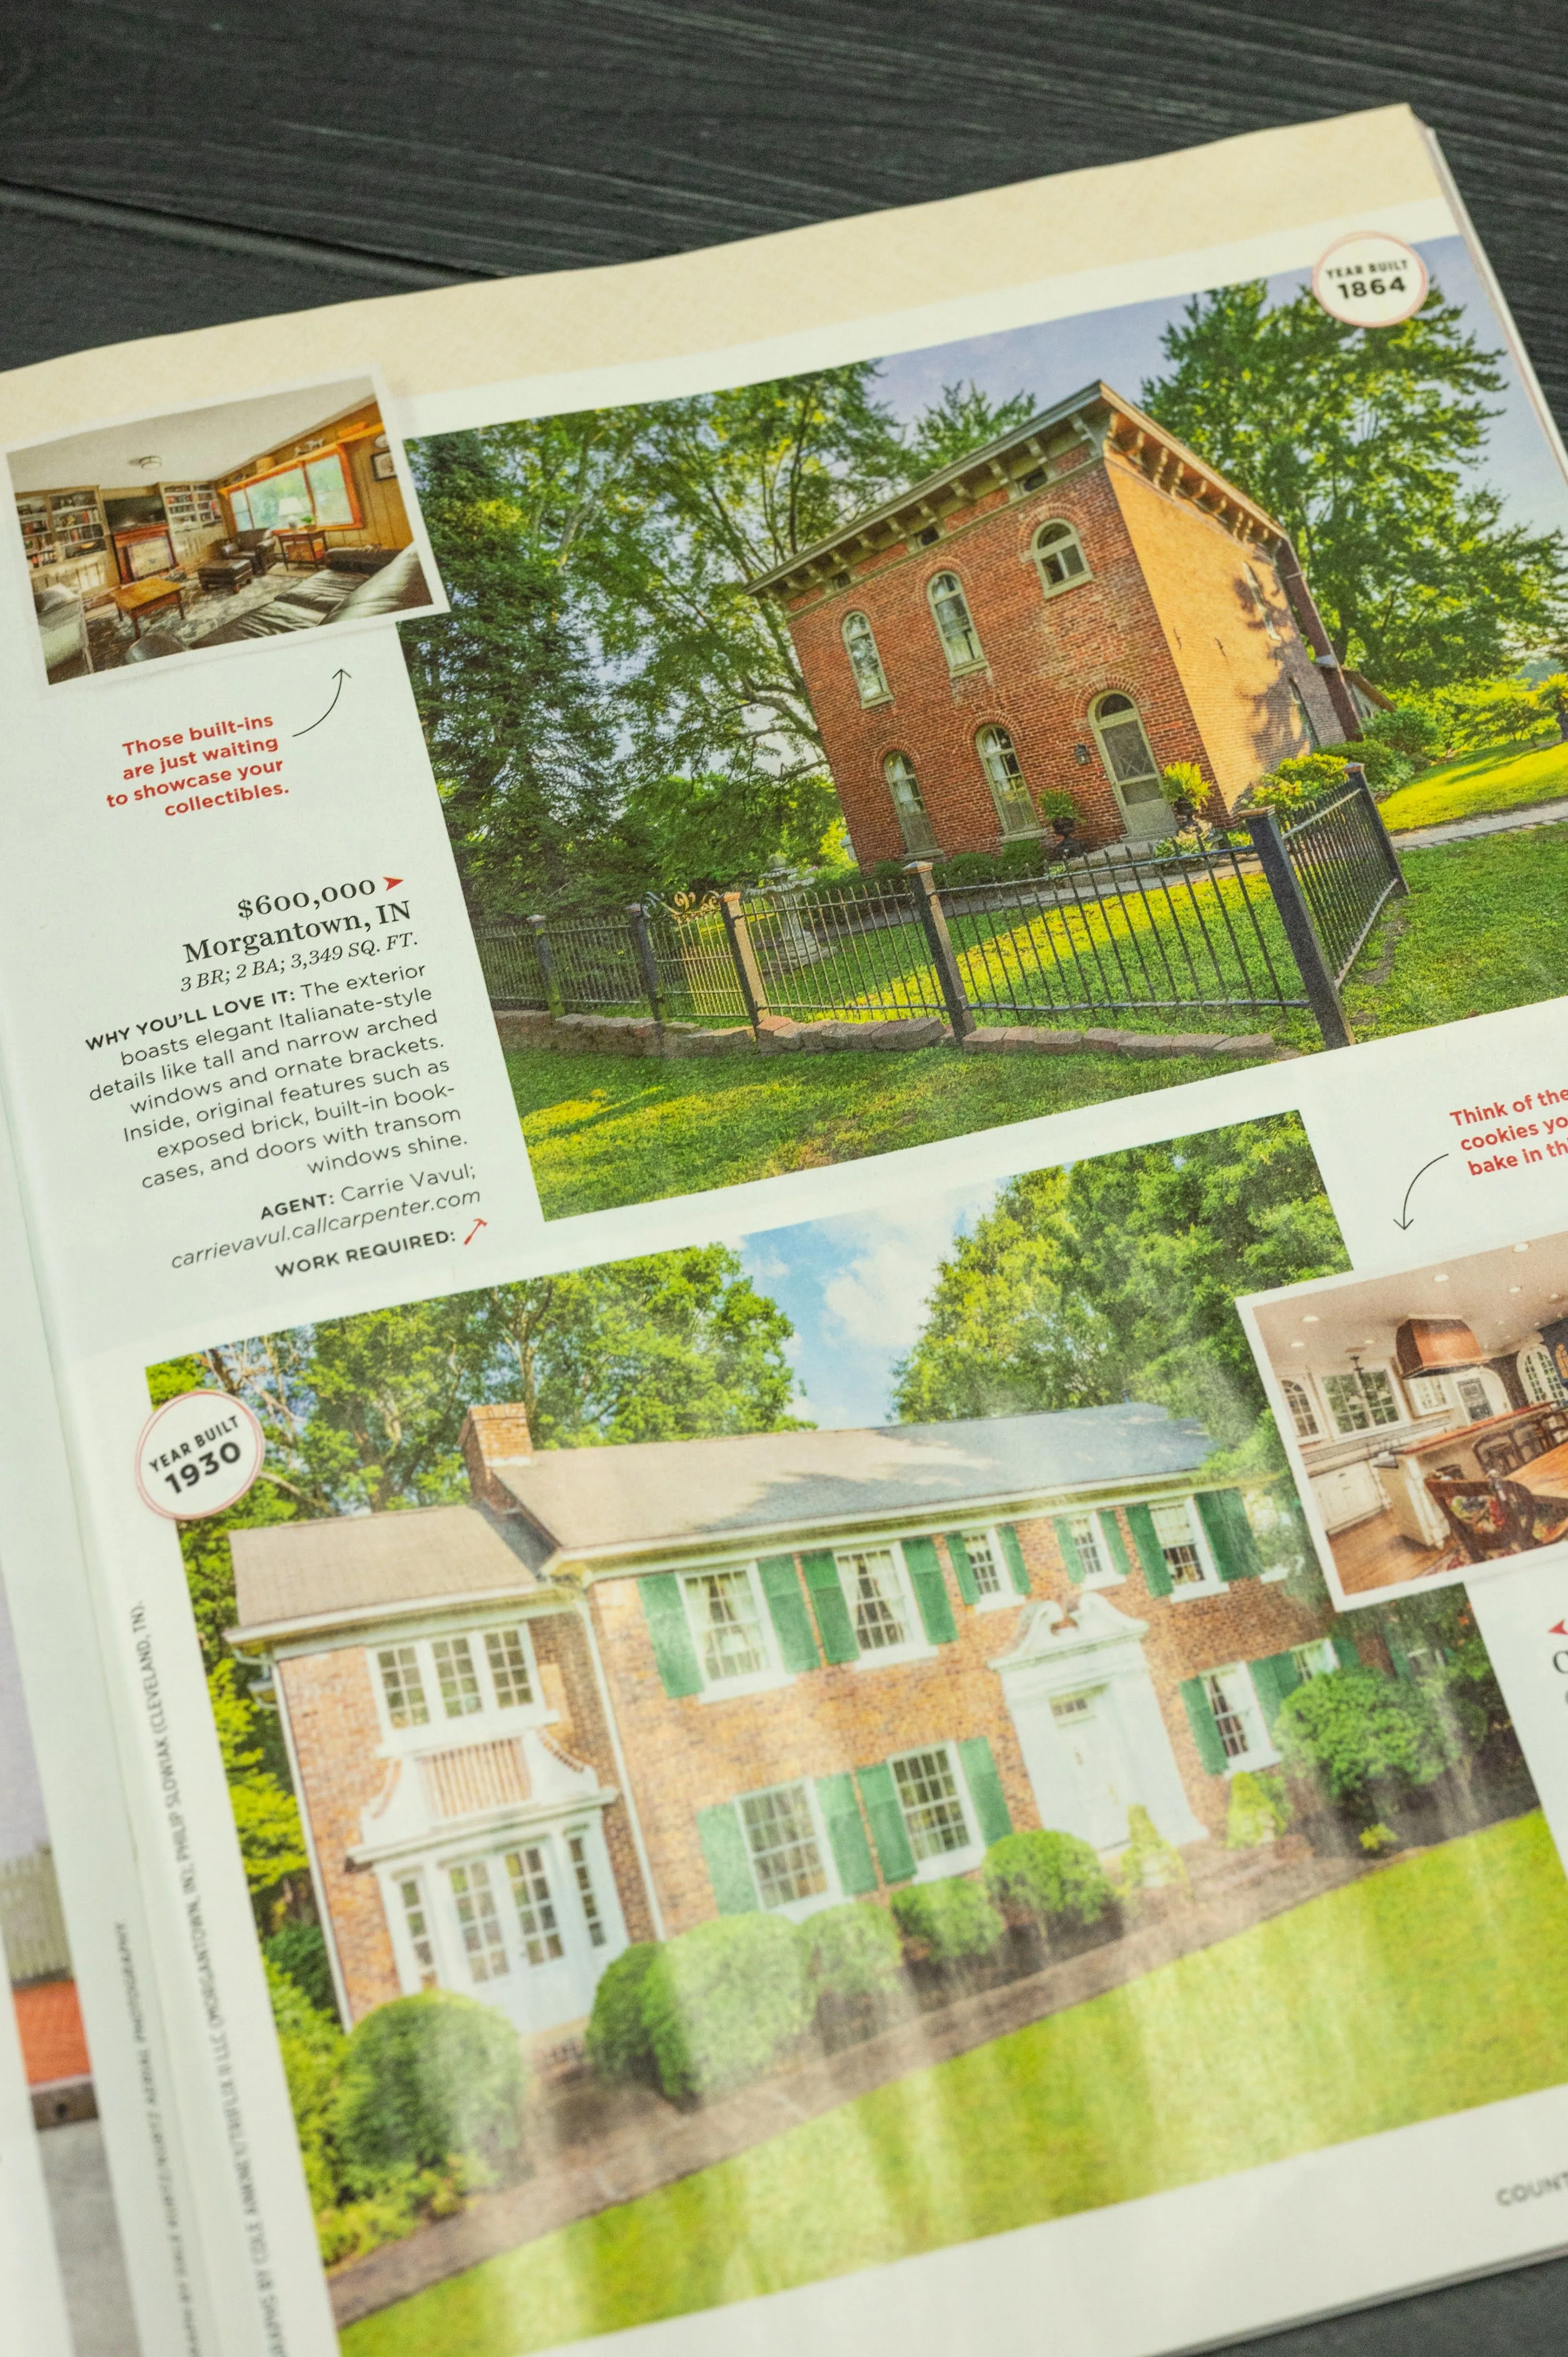 A printed real estate advertisement featuring historic homes for sale with exterior shots and details of the properties.